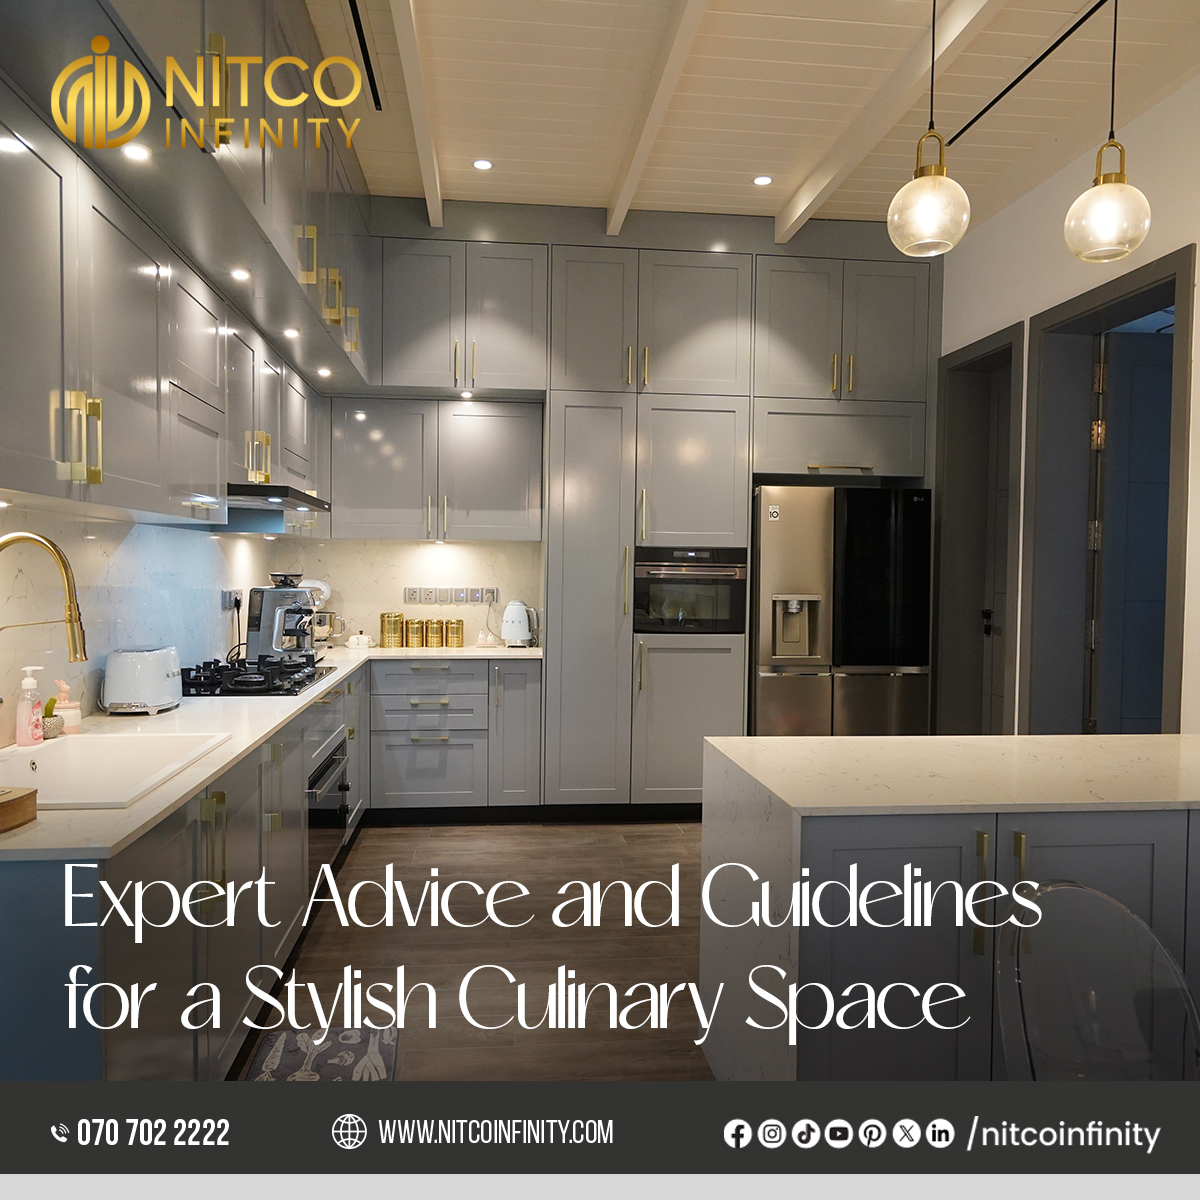 Optimal cabinet placement ensures easy cleaning and maximizes storage space. We will thoroughly look into all aspects of small detail and bring the best for you
📲 0707022222

#comfortableliving #nitcoinfinity #minimalisticstyle #kitcheninterior #modernkitchen #kitchenideas